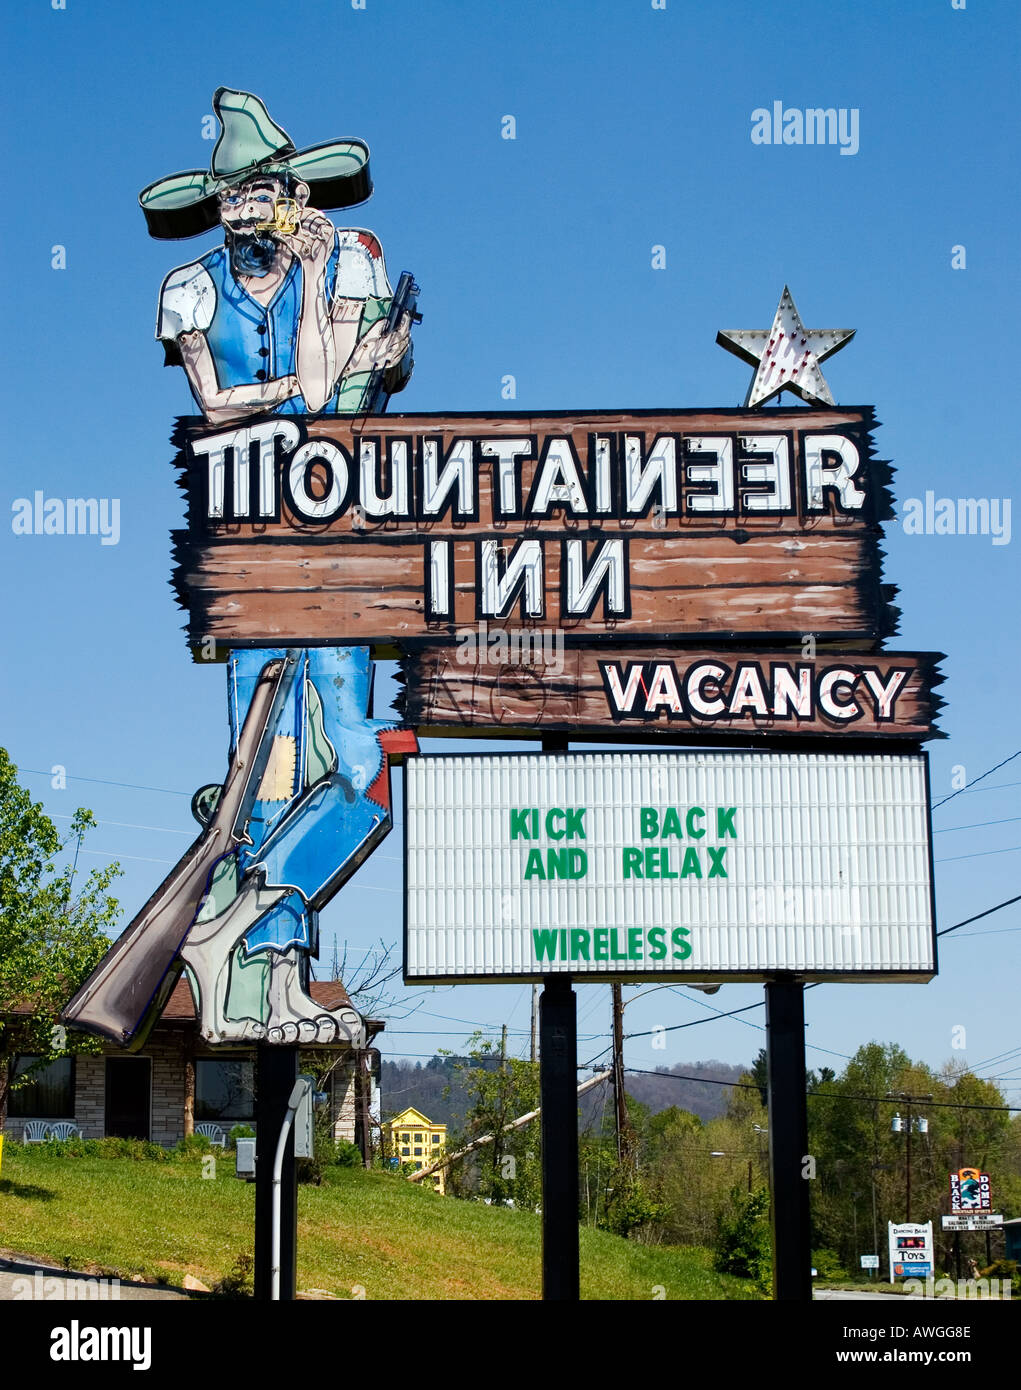 Mountaineer Inn sign at a motel located in Ashville North Carolina Stock Photo